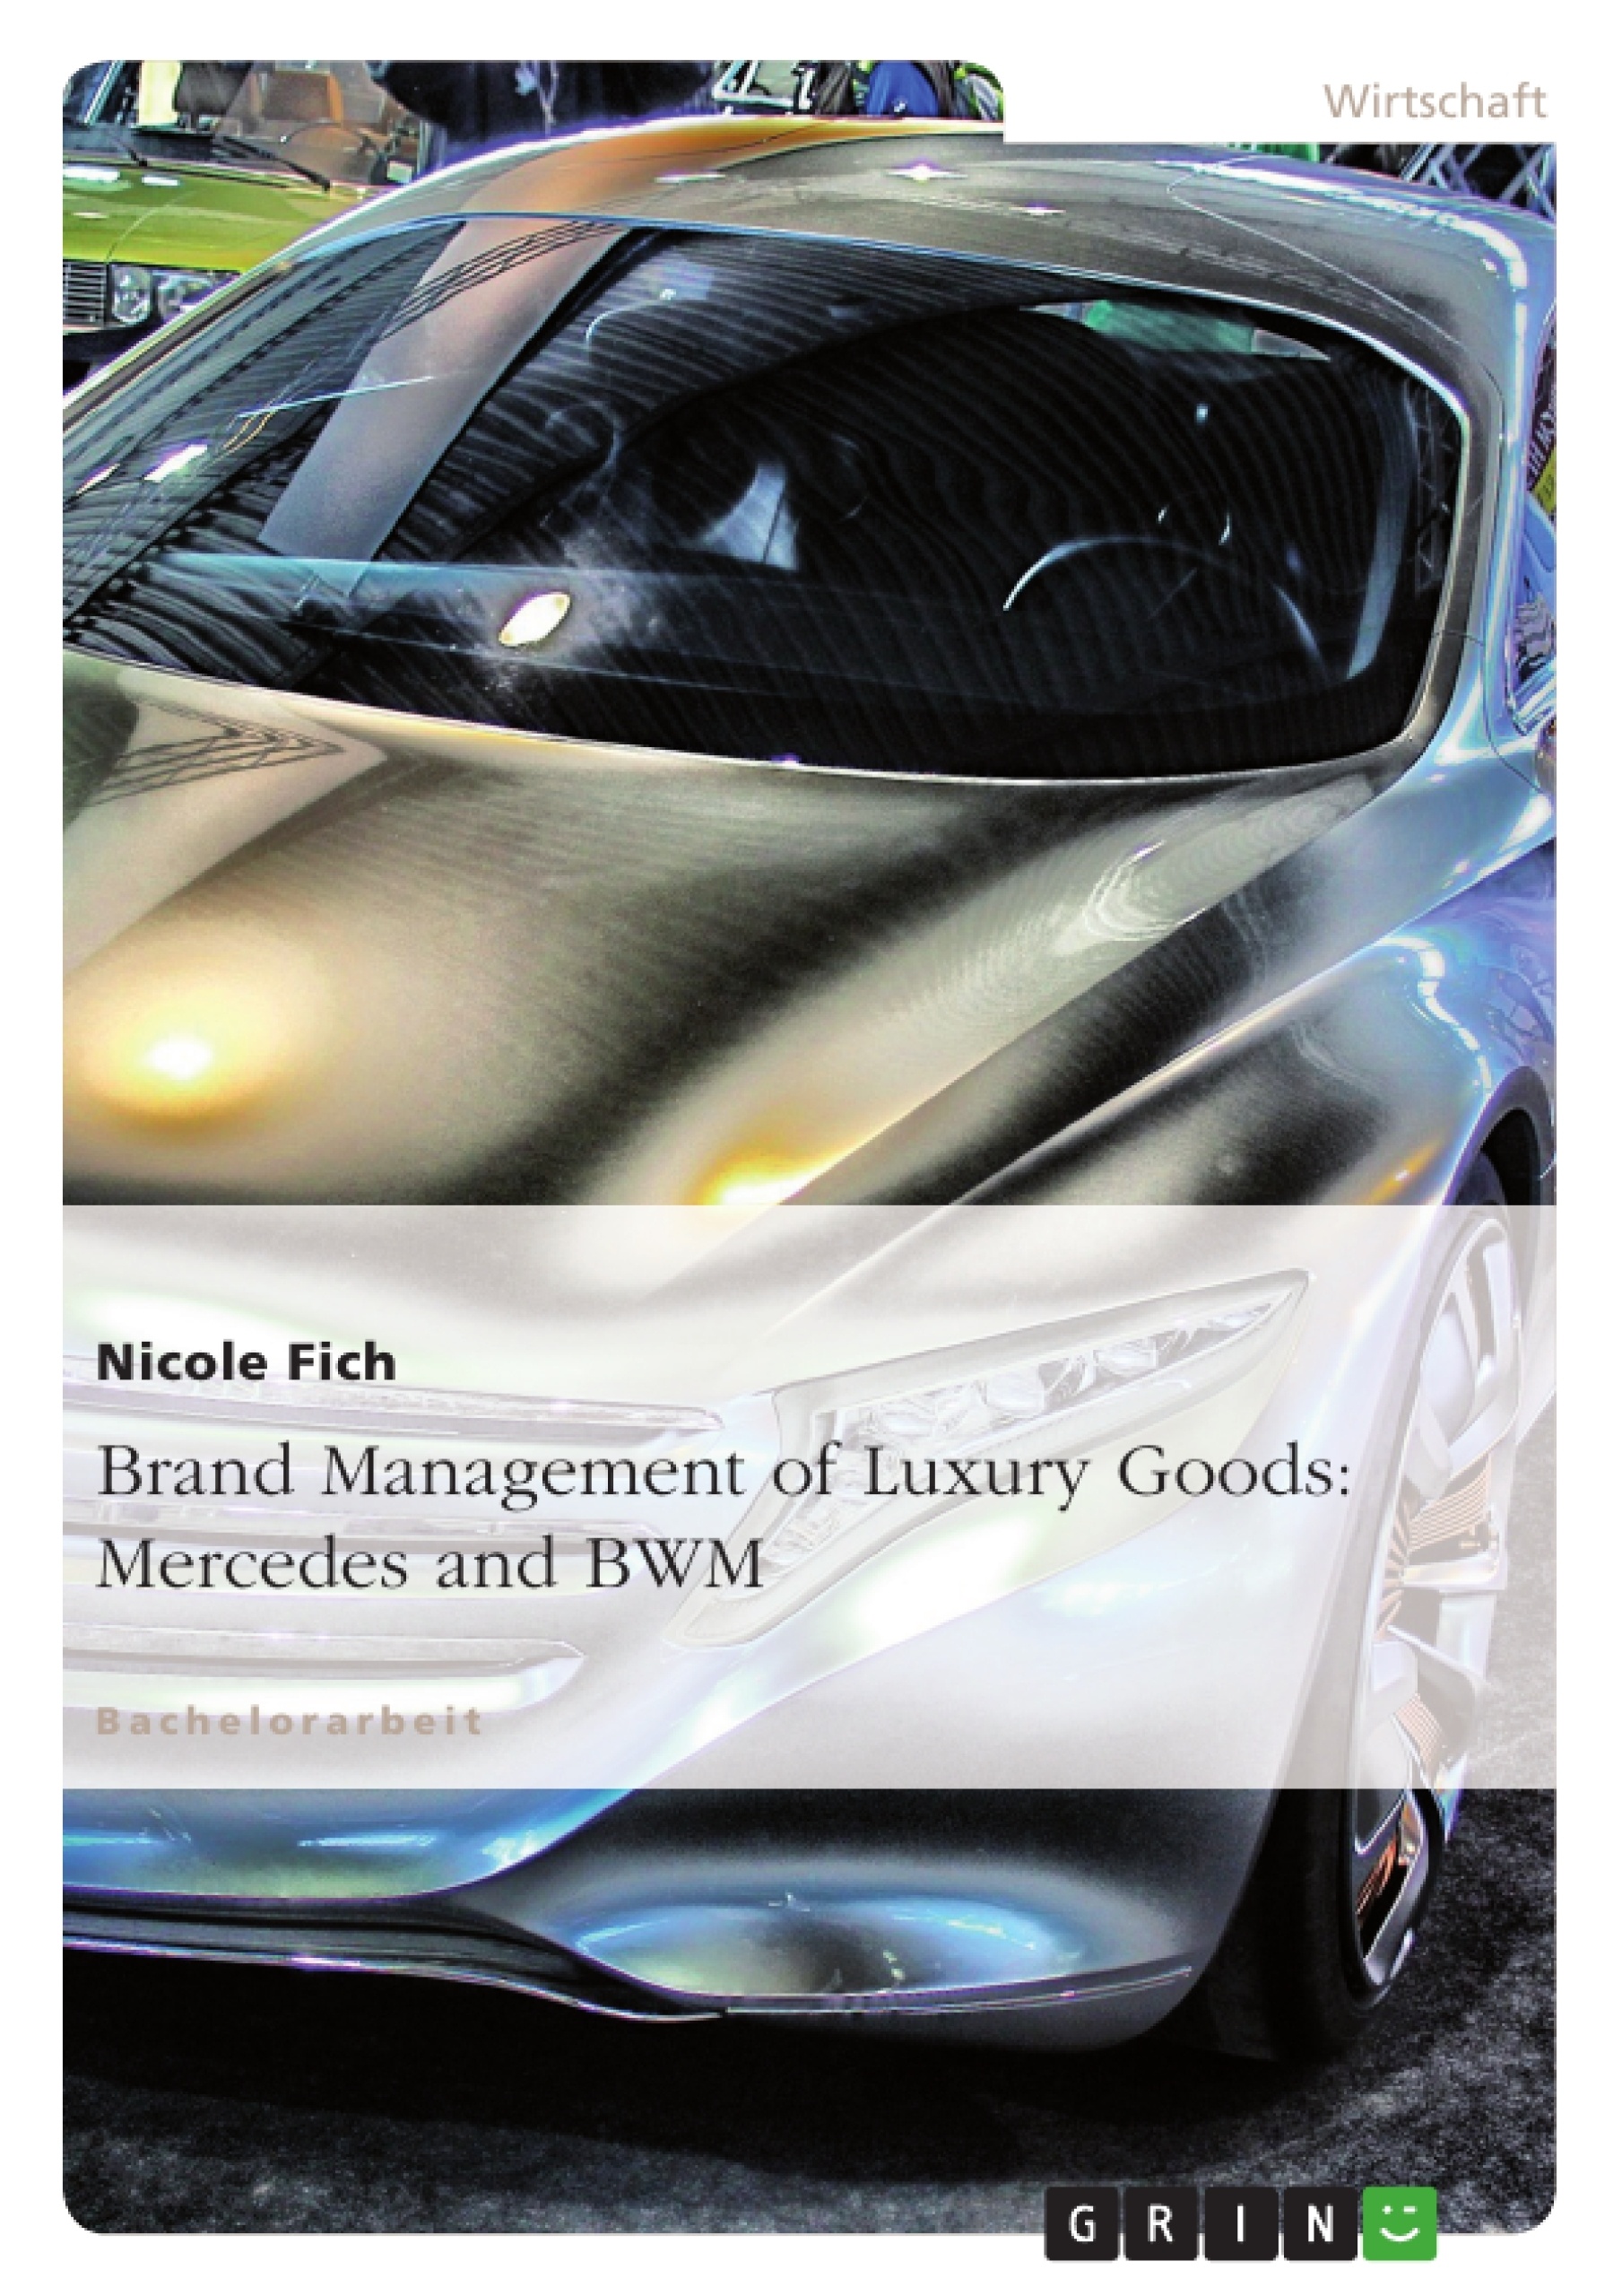 Title: Brand Management of Luxury Goods: Mercedes and BMW